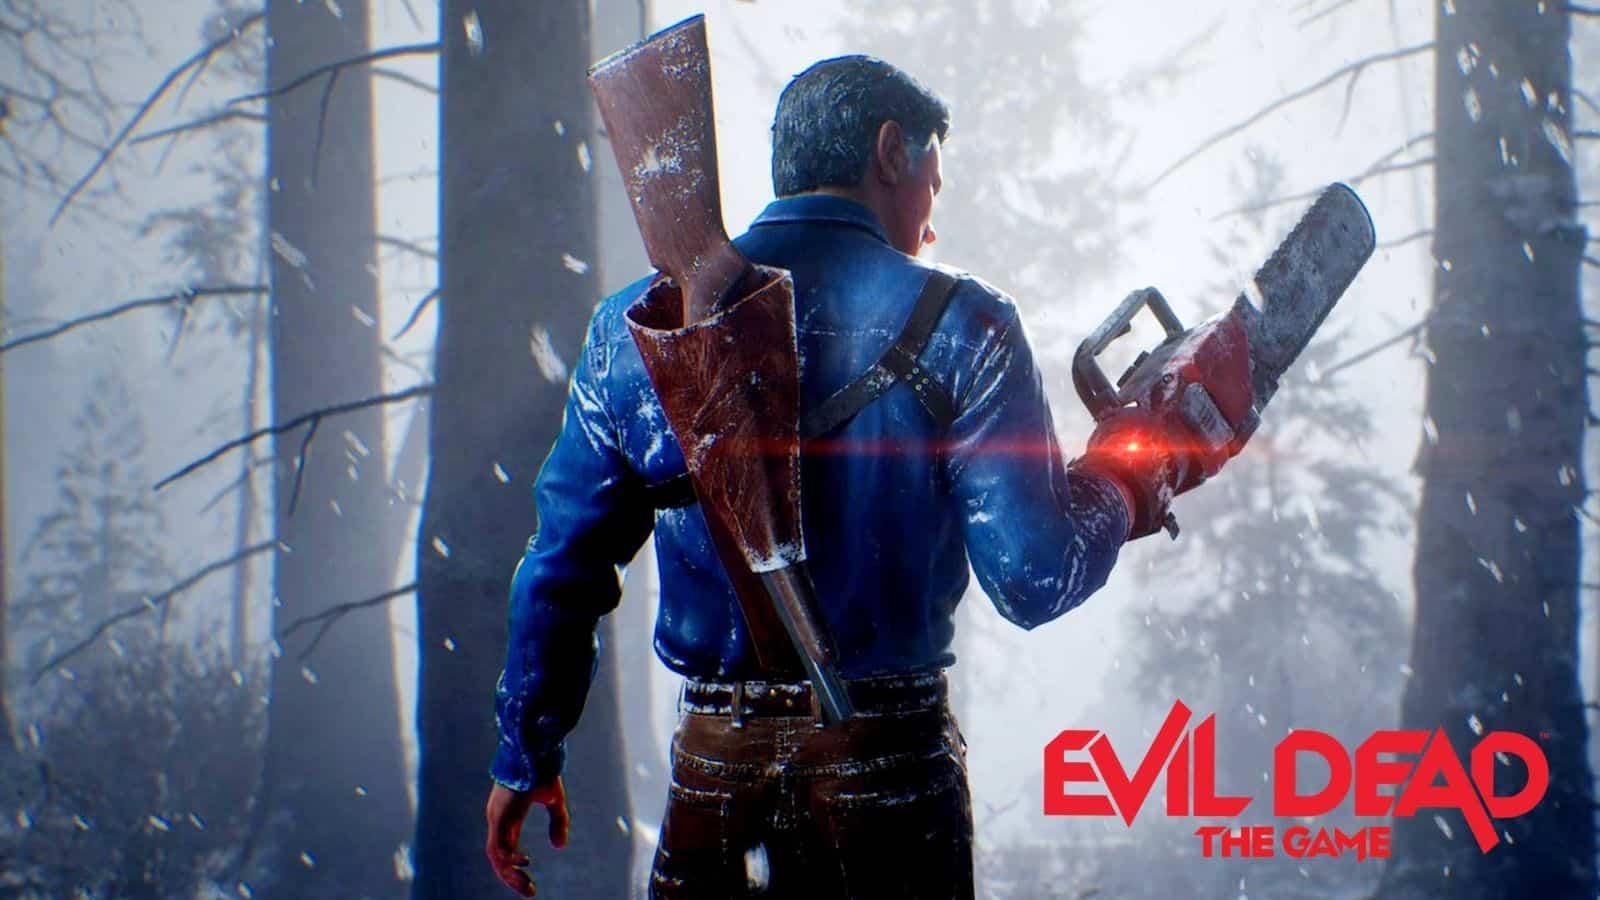 Will Evil Dead: The Game Feature on Xbox Game Pass?